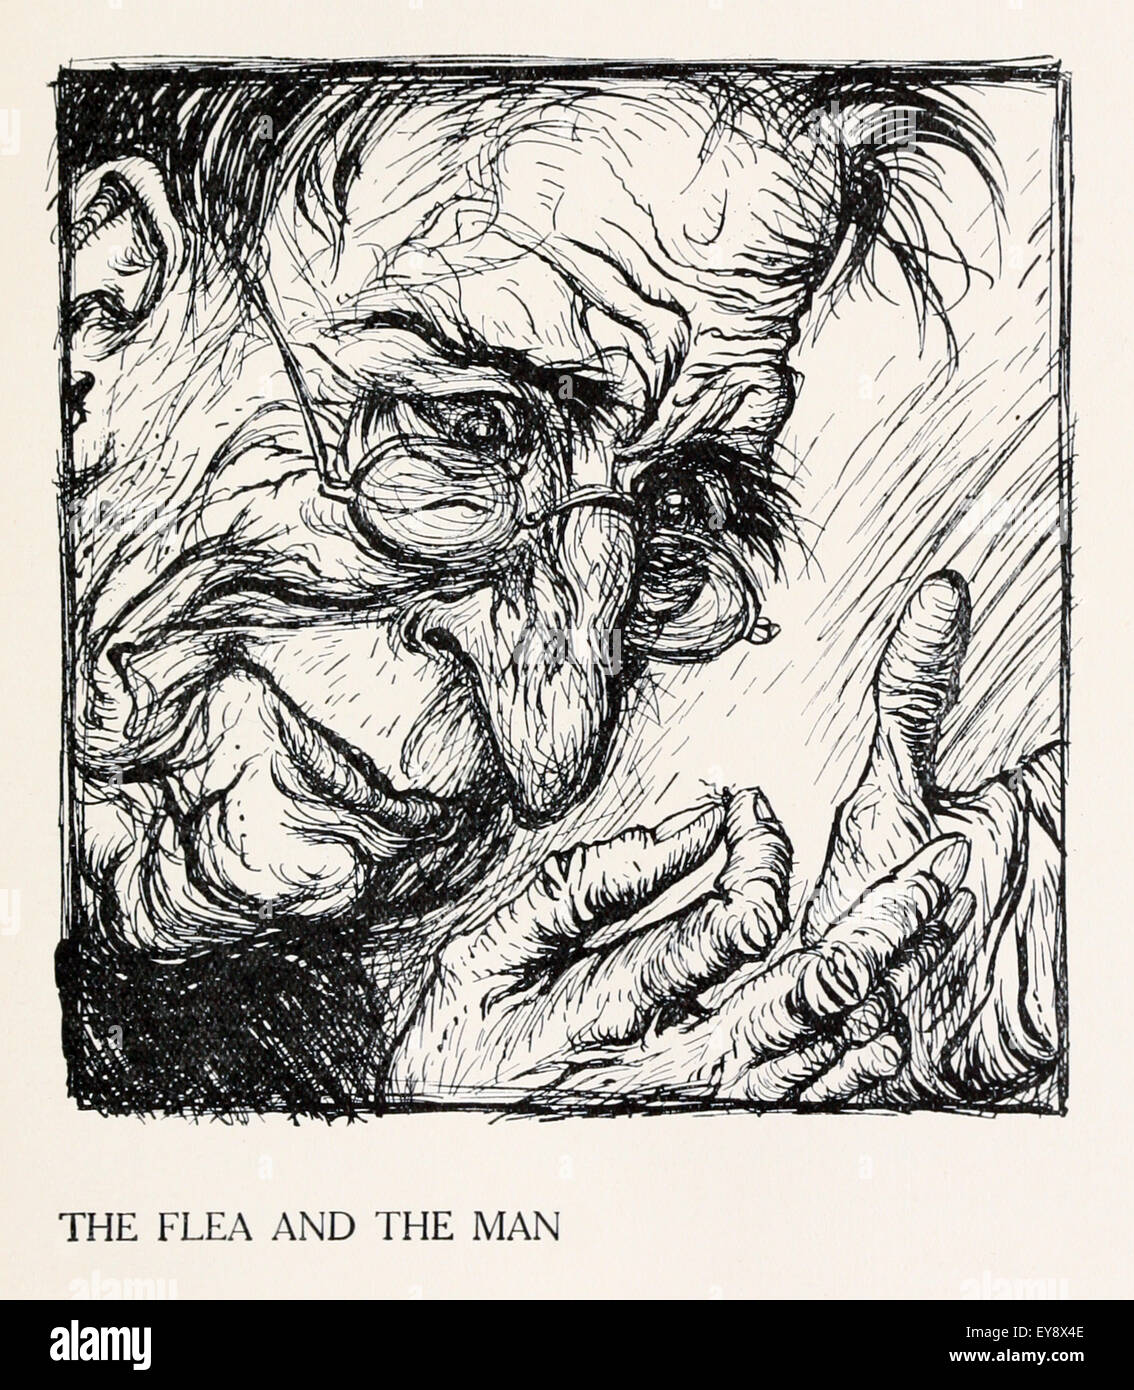 'The Flea and the Man' fable by Aesop (circa 600BC). A Flea begged for his life after biting a man. No argument the Flea used could be enough to sway the man from killing the evil Flea. Moral: Tolerate no evil. Illustration by Arthur Rackham (1867-1939). See description for more information. Stock Photo